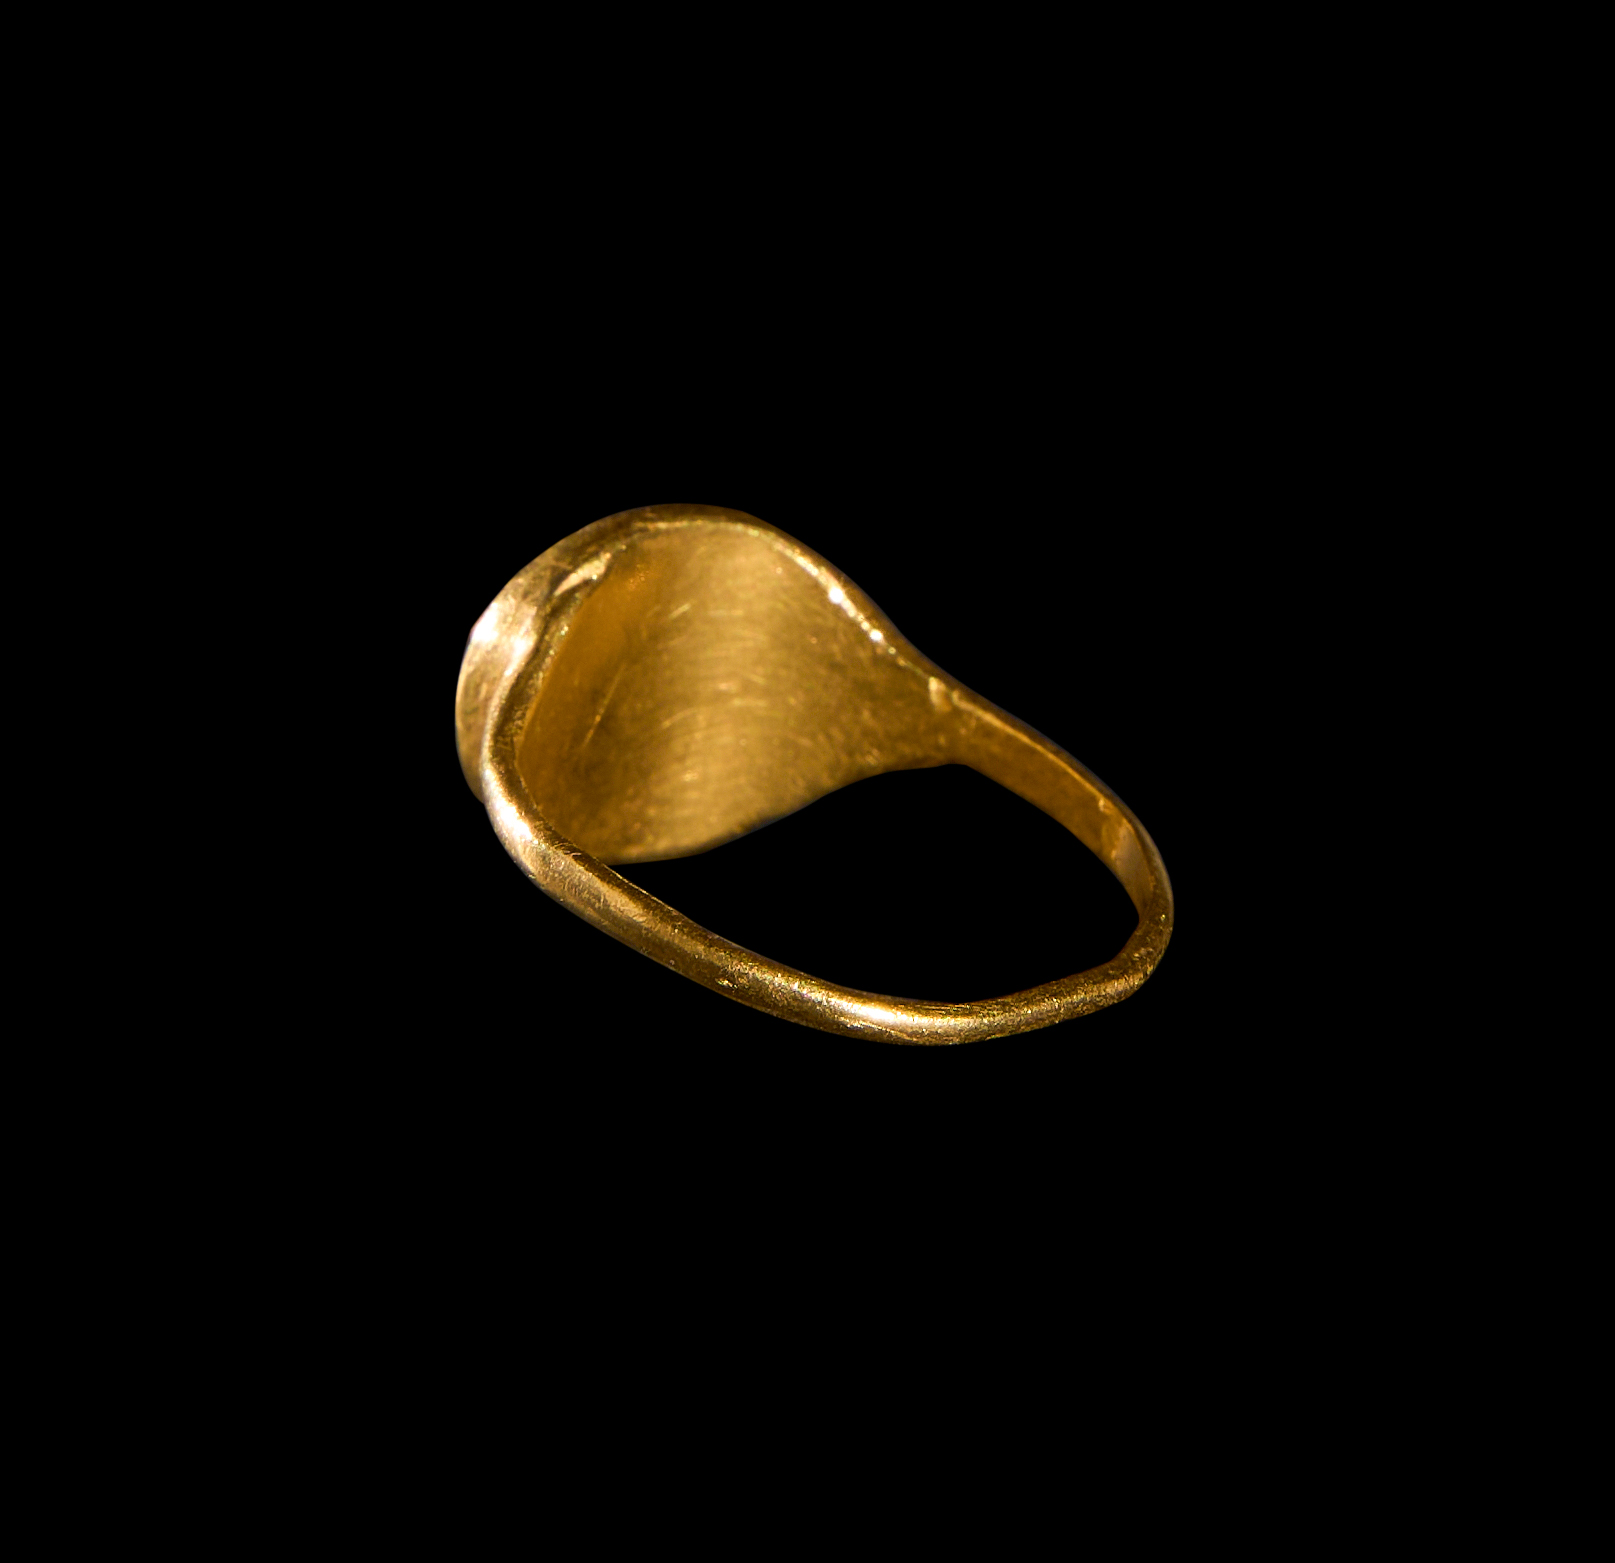 A ROMAN GOLD AND NICOLO RING DEPCITING THE STORY OF CAPITOLINE WOLF CIRCA 3RD-4TH CENTURY A.D. - Image 3 of 3